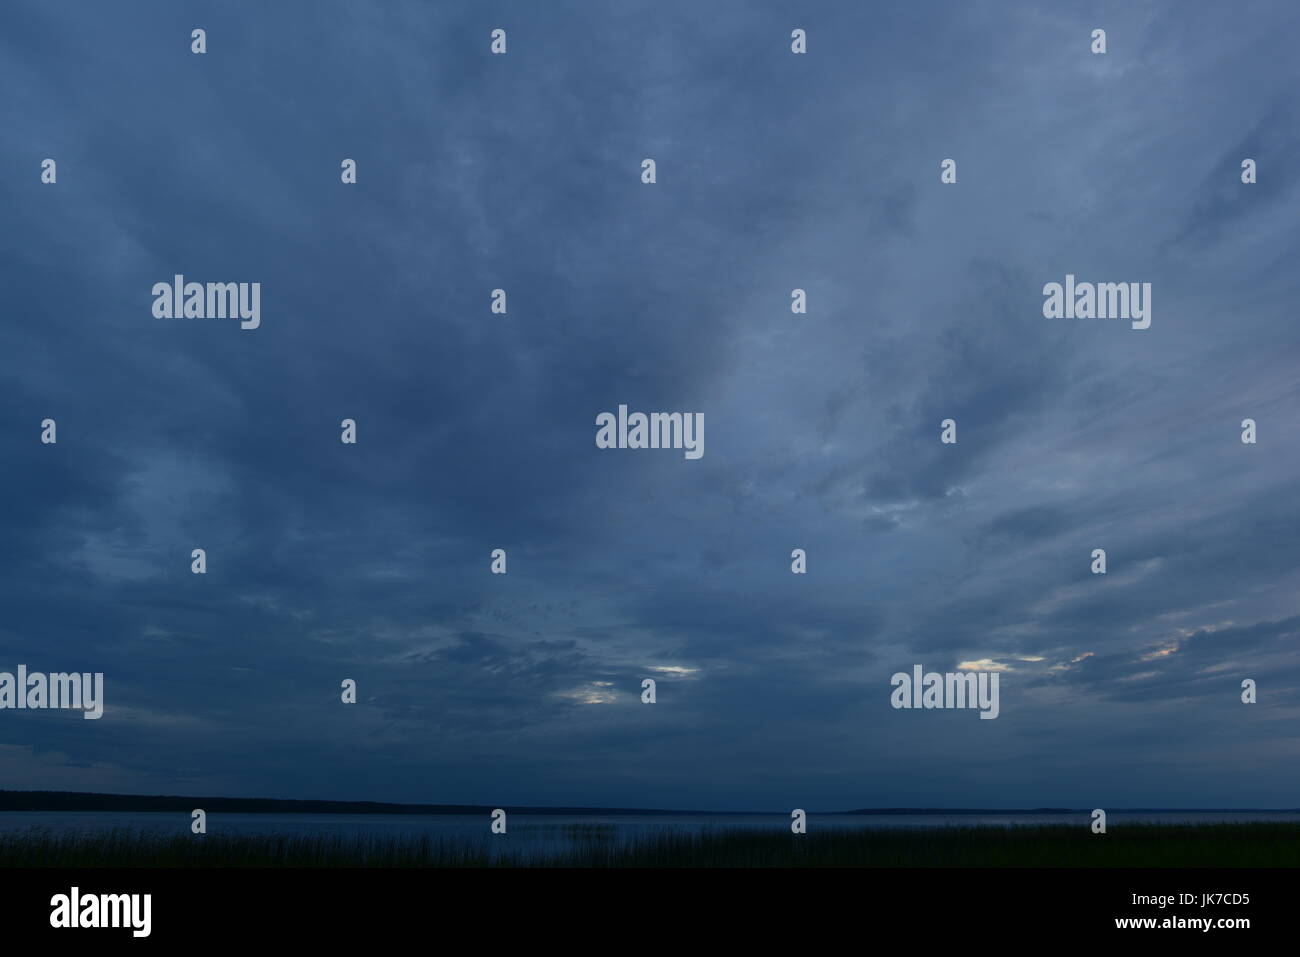 Bad weather cloudy sky dark blue above the lake Stock Photo